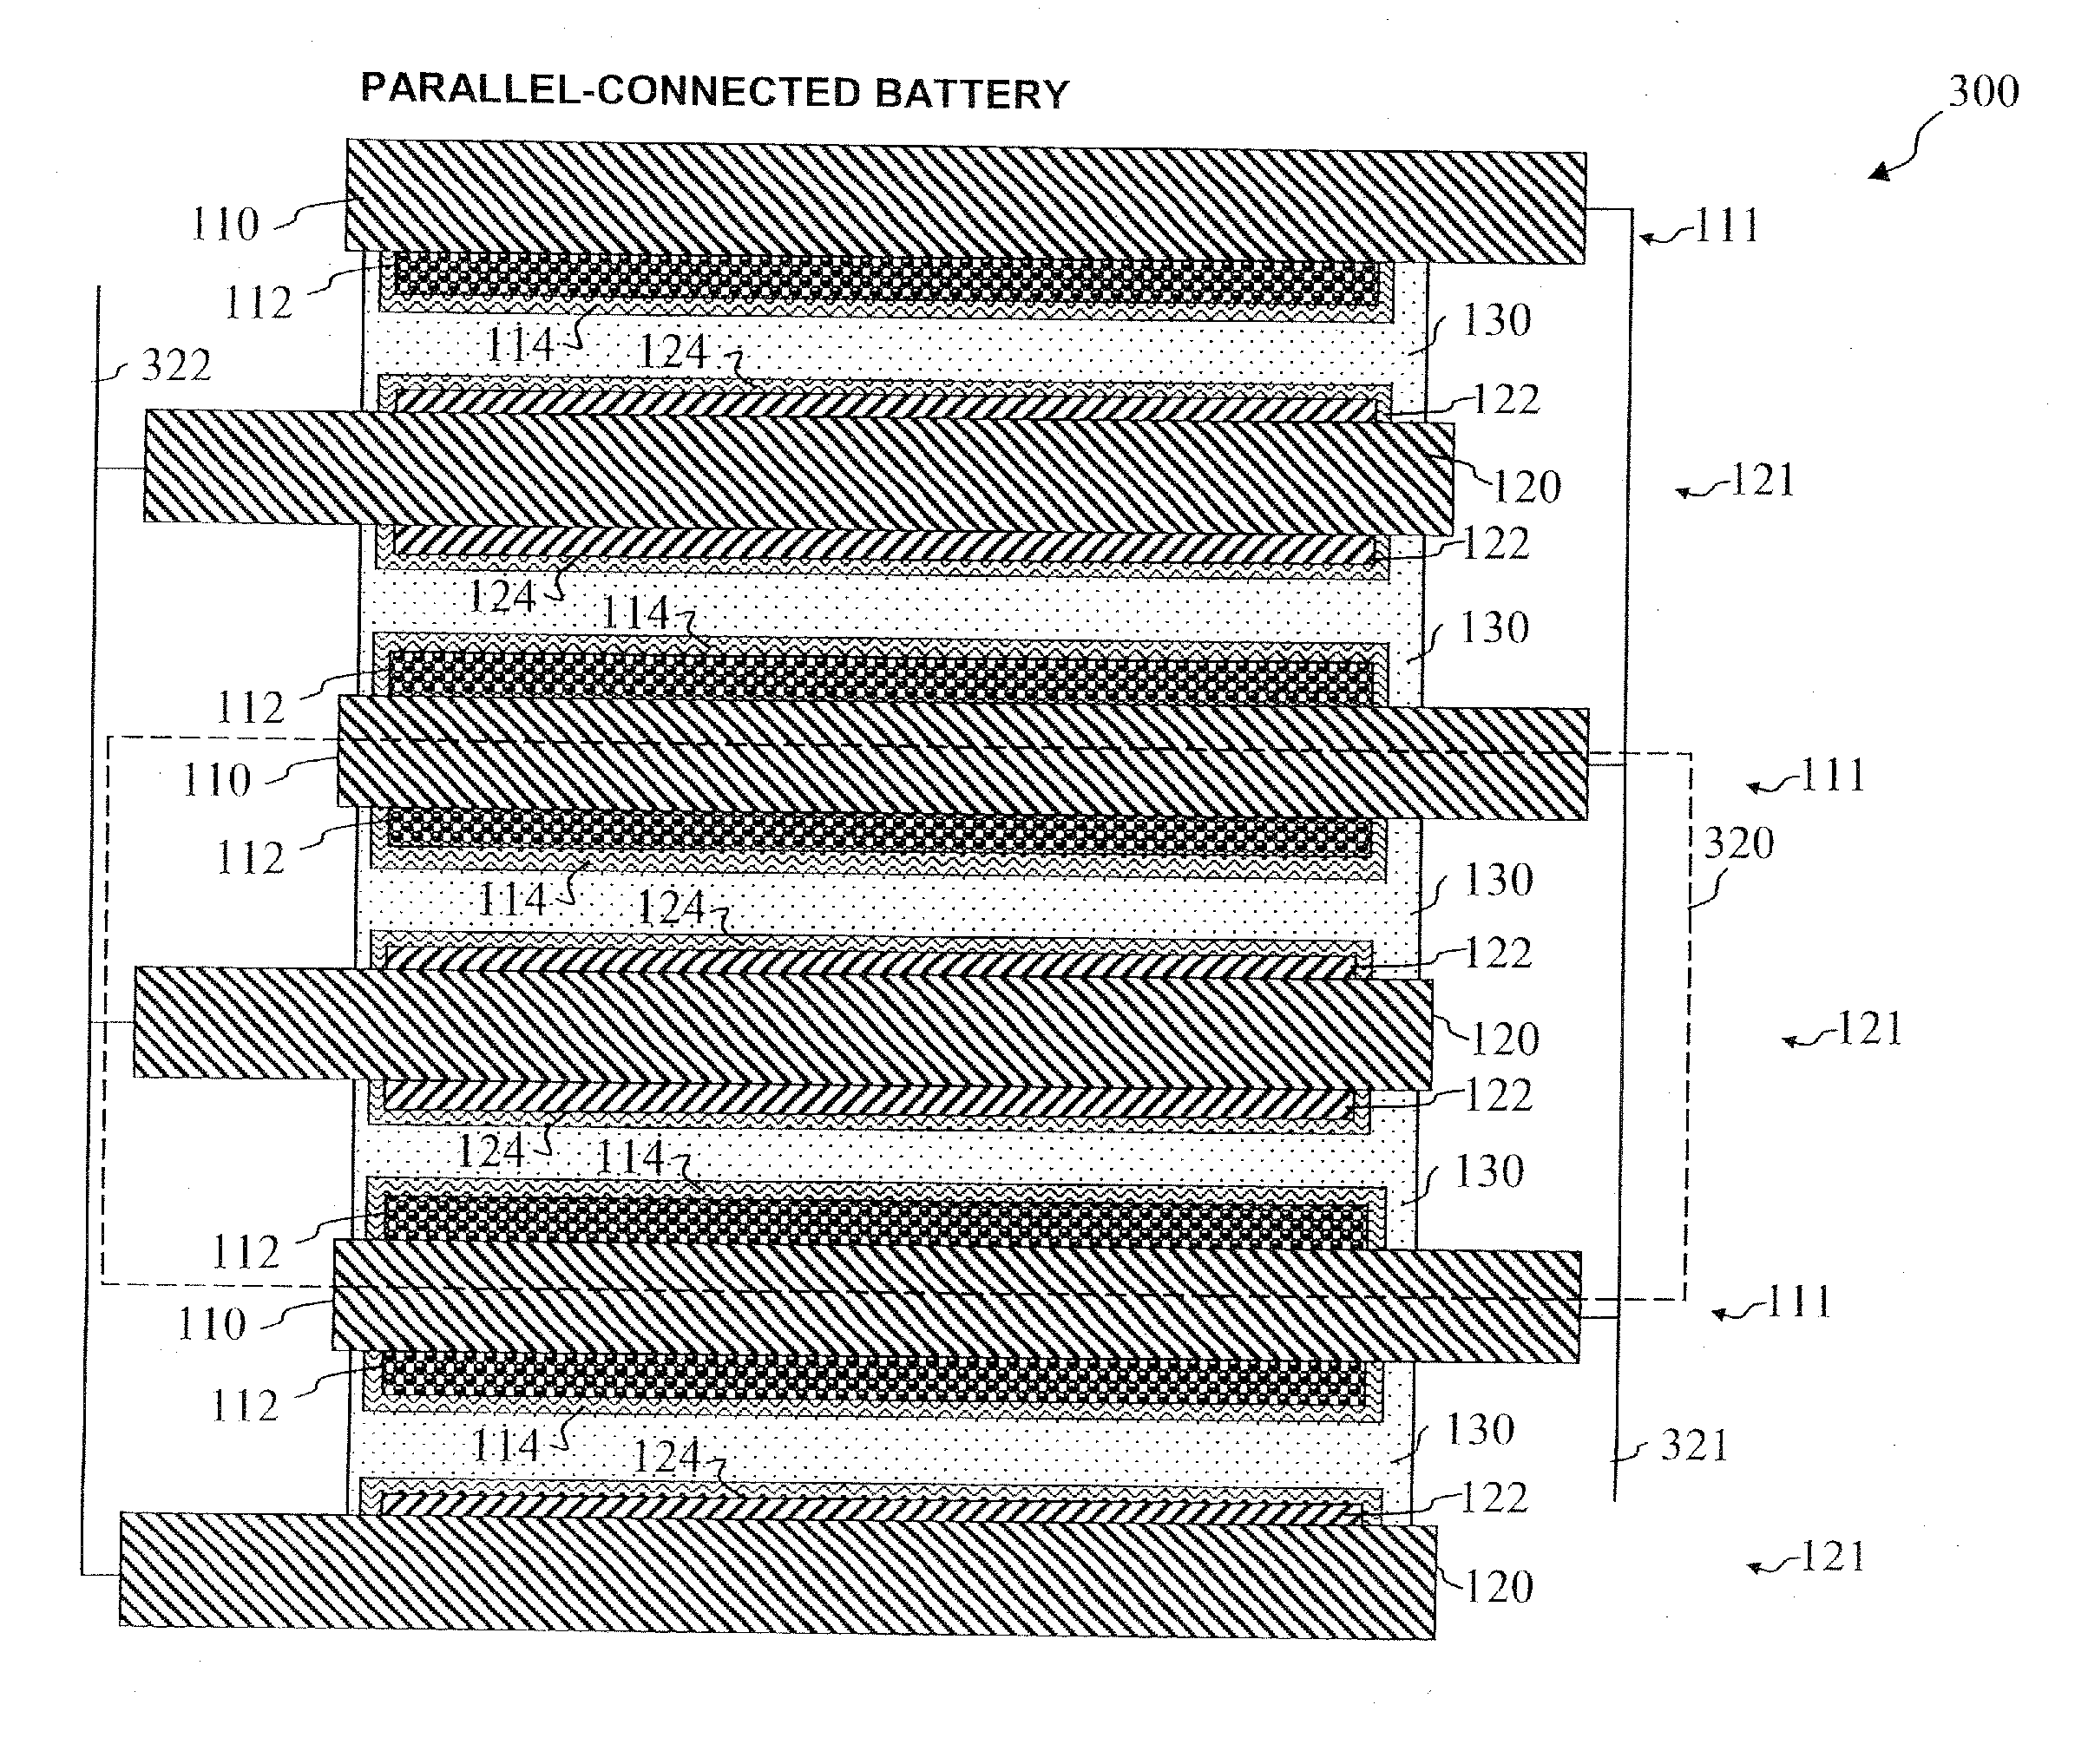 Thin-film batteries with soft and hard electrolyte layers and method